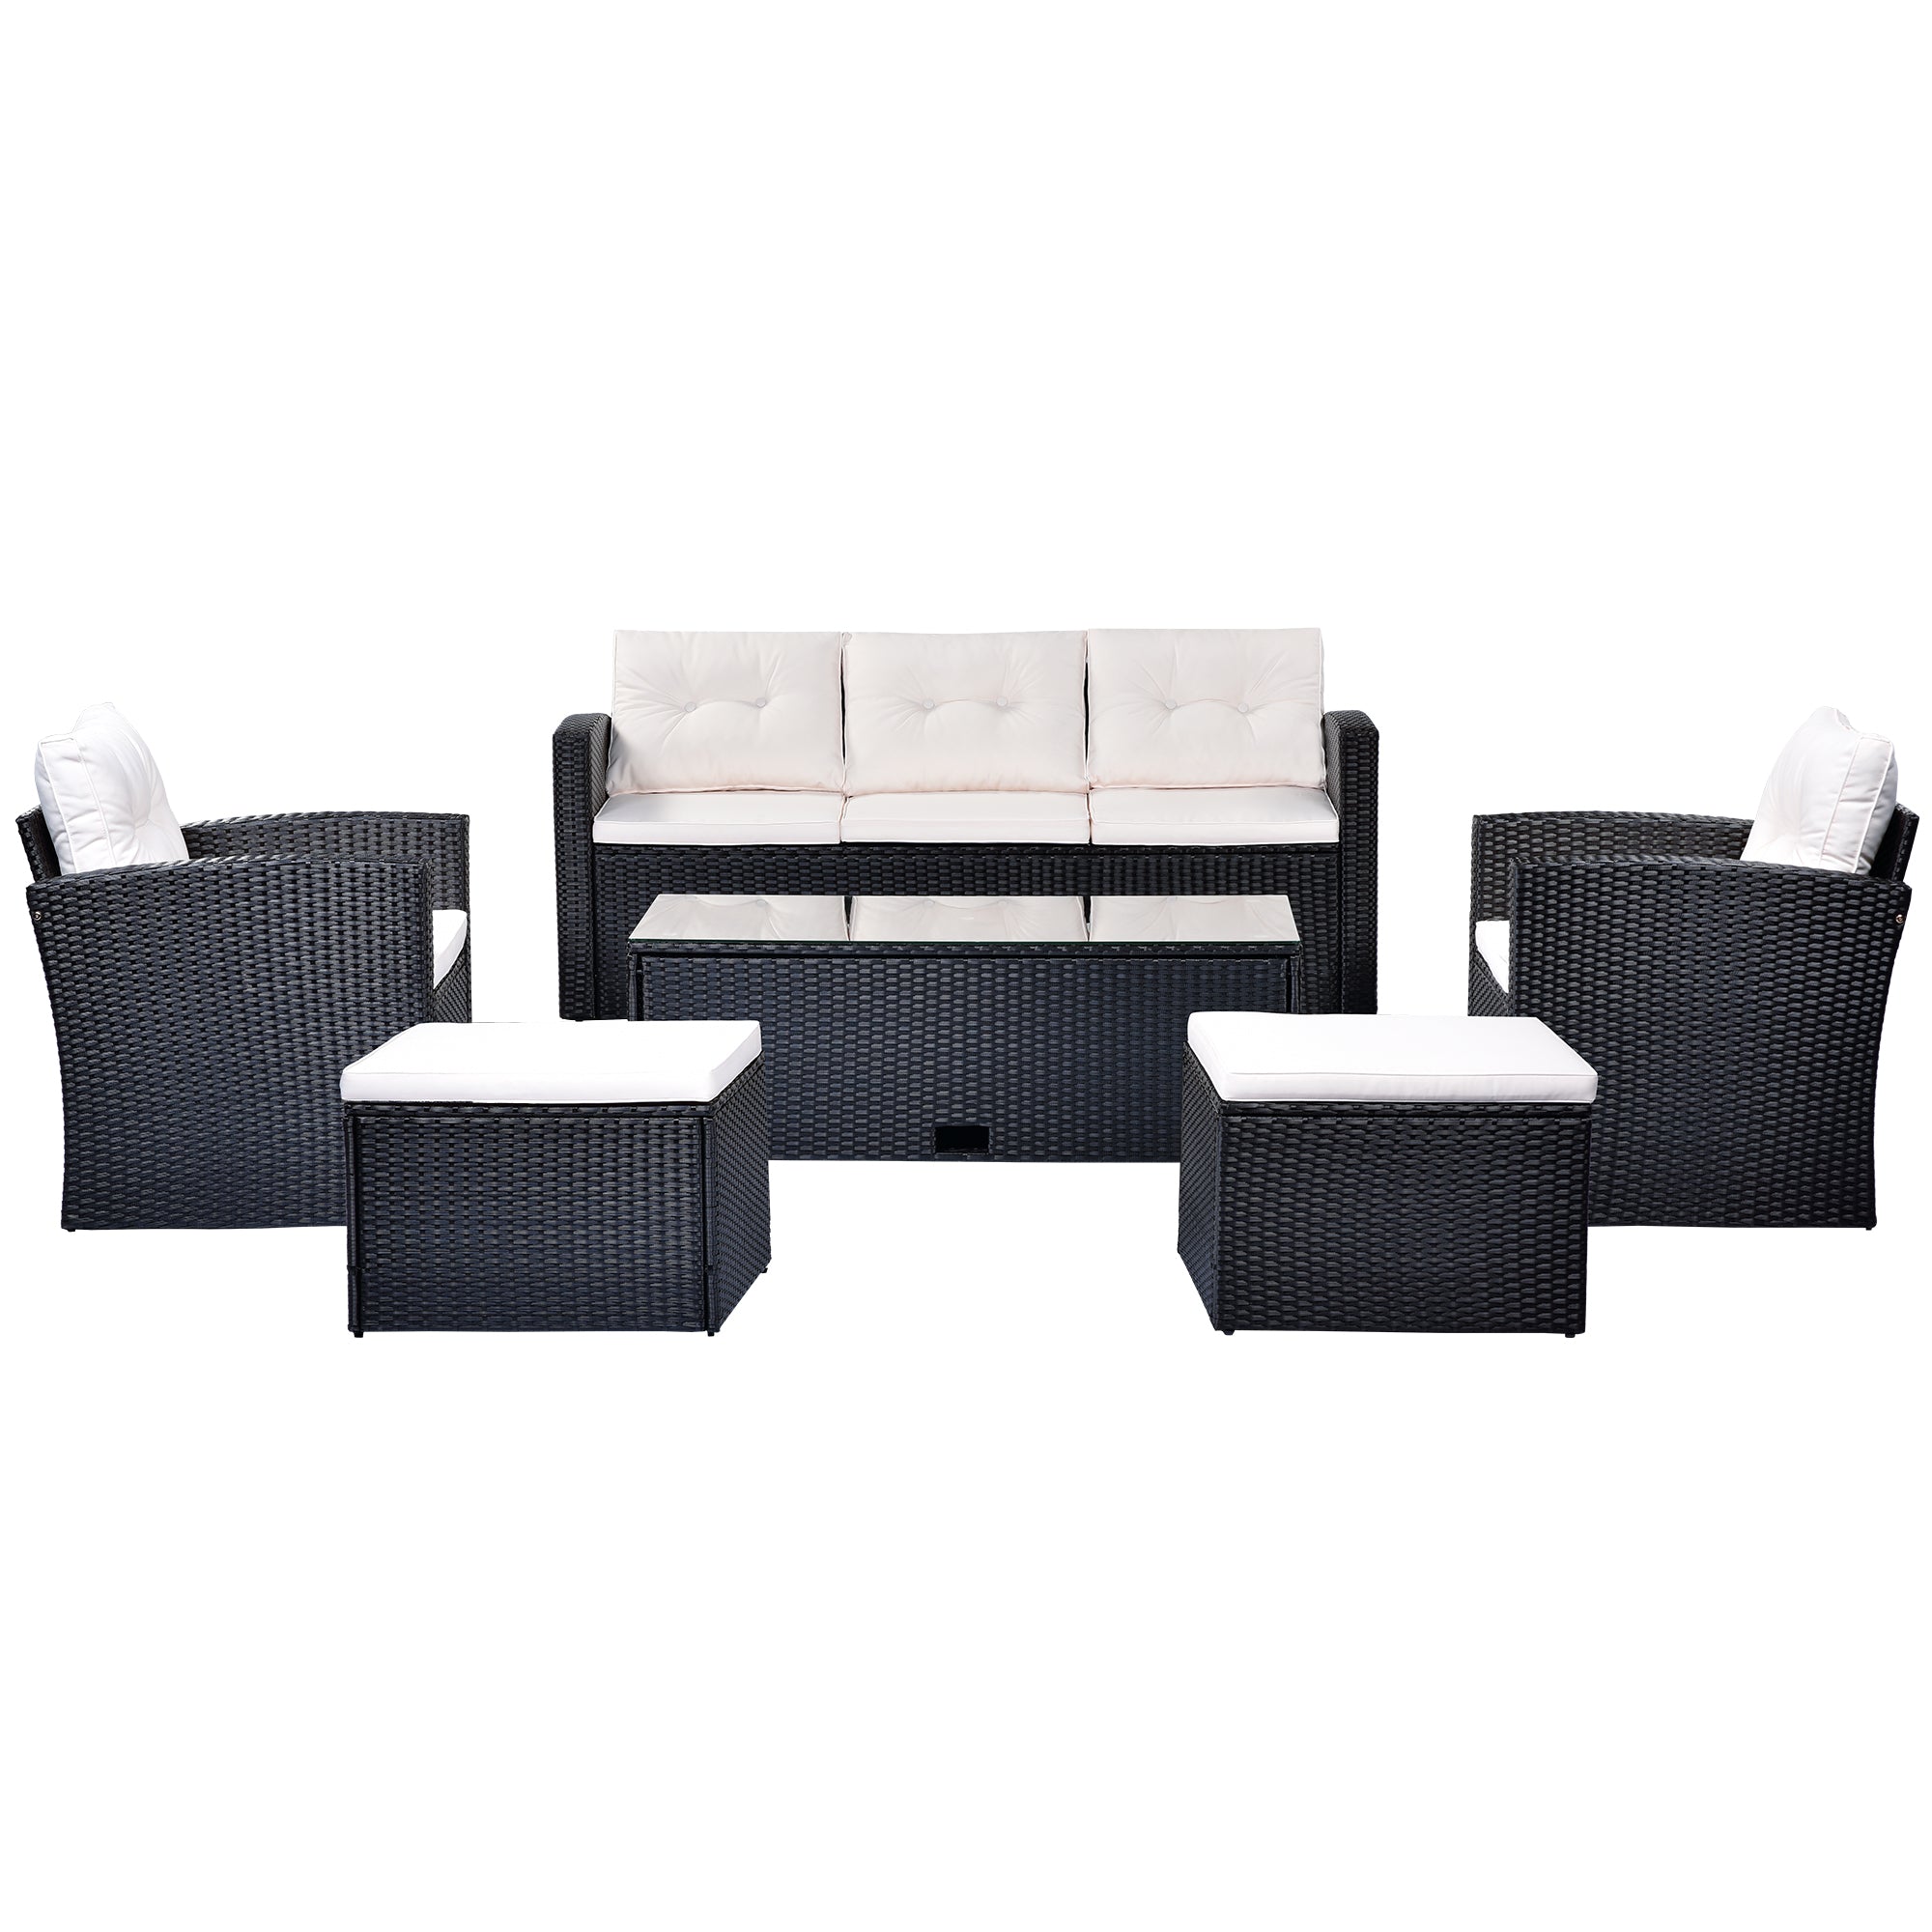 6-piece Wicker PE rattan Patio Outdoor Dining Conversation Sectional Set with coffee table, wicker sofas, ottomans, removable cushions (Black wicker, Beige cushion)-Boyel Living